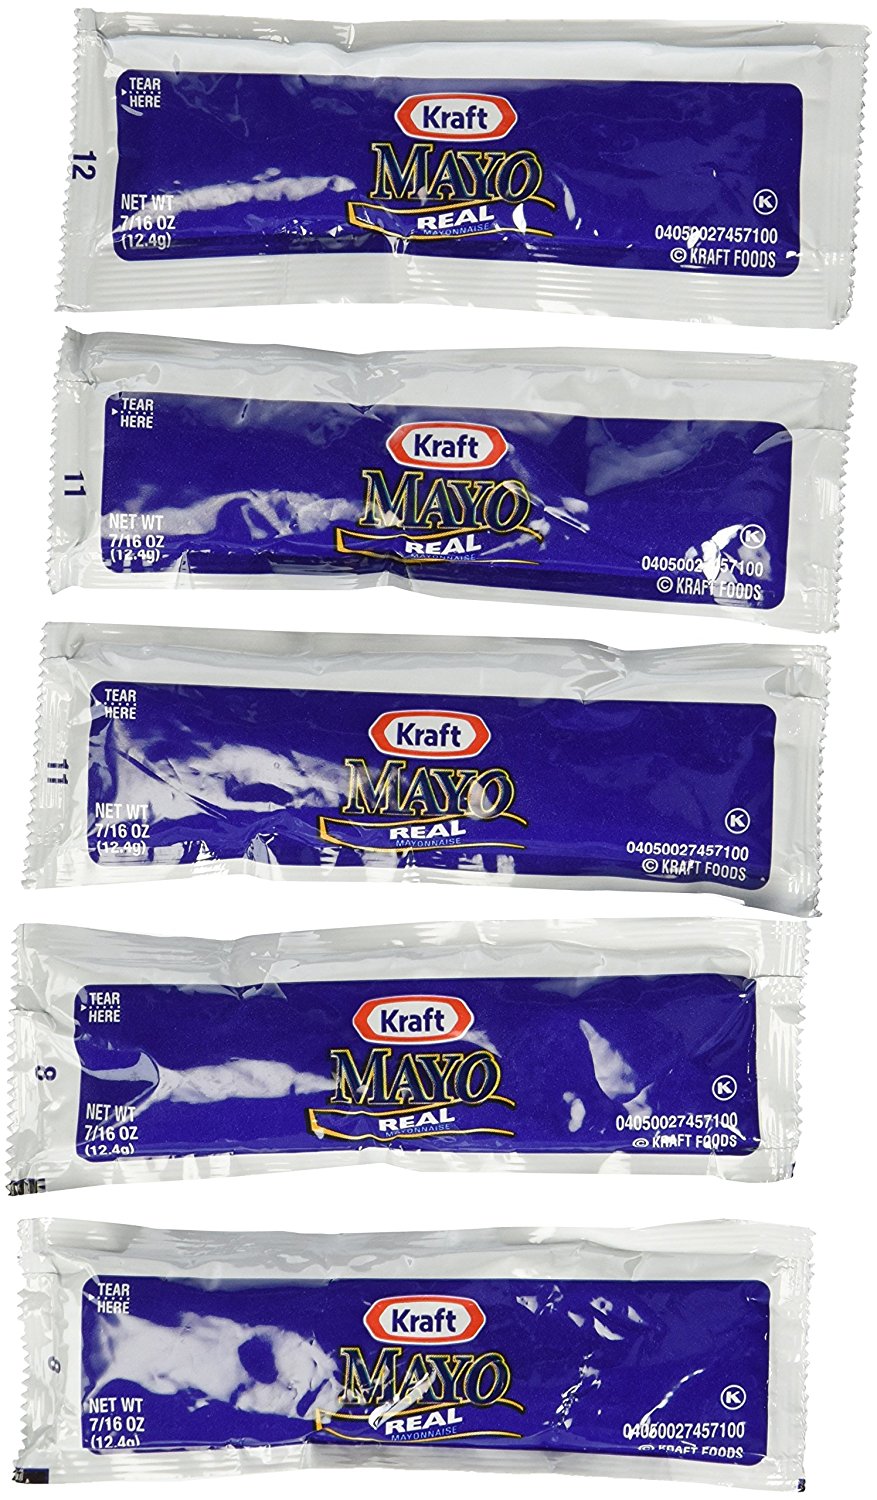 Kraft Real Mayo 0.44 Ounce pouch - 200ct